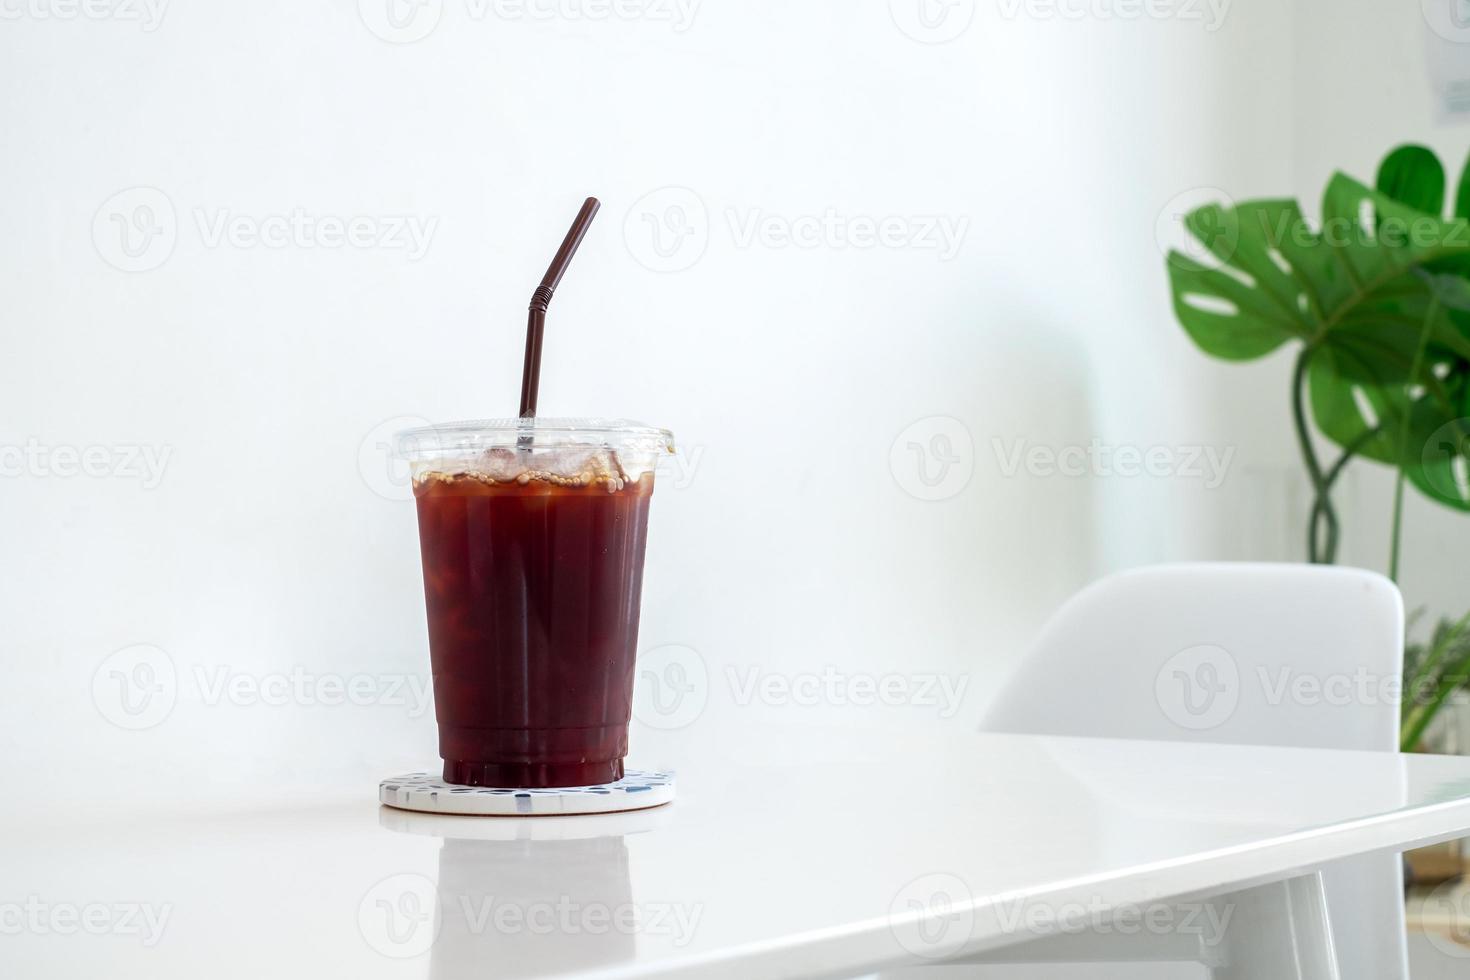 Black coffee, Americano coffee in plastic coffee cup on white table in coffee shop, food, beverage and health concept,copy space photo